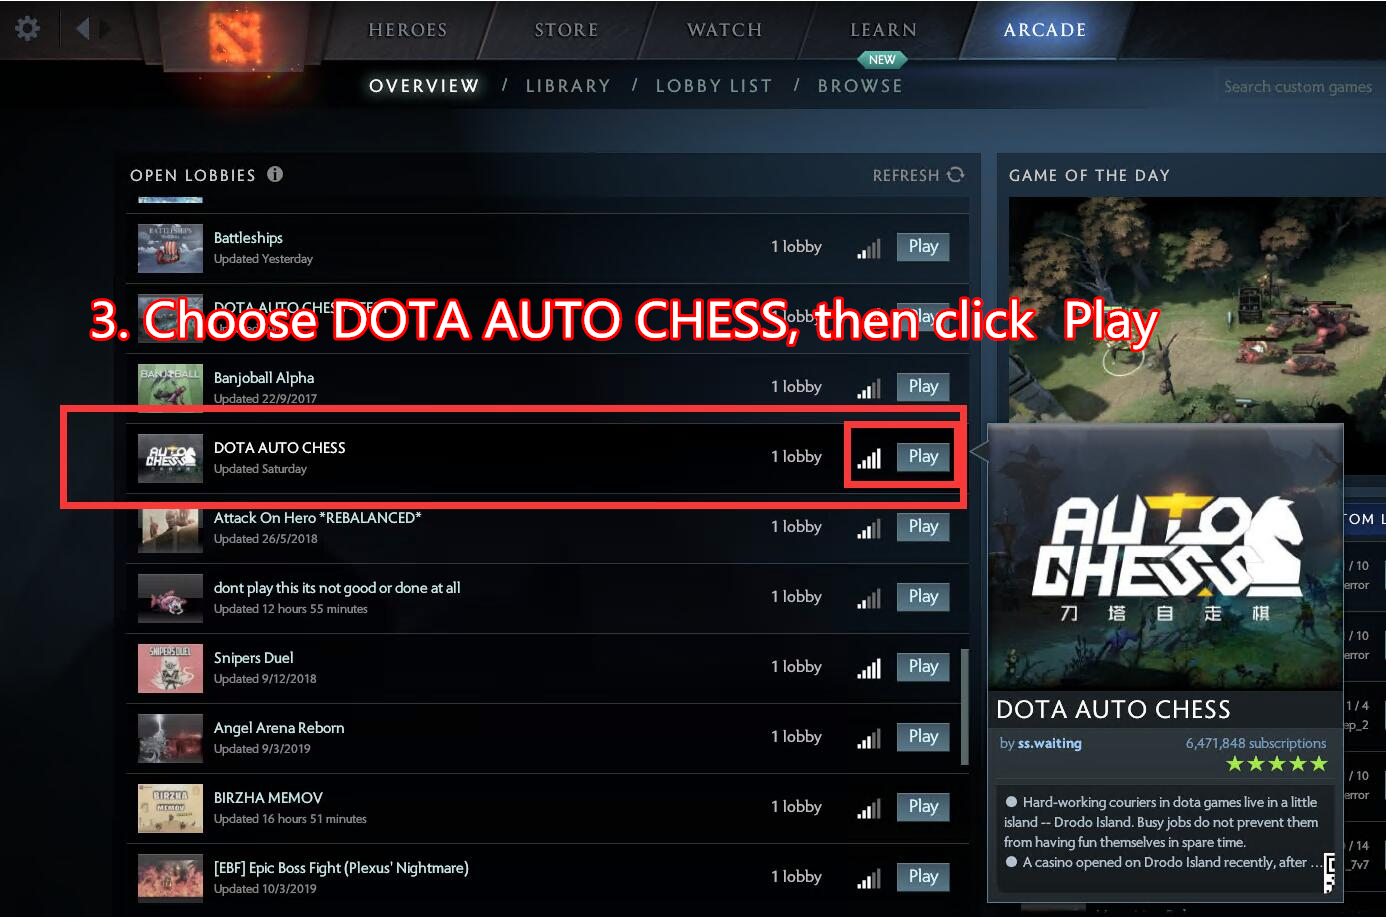 How To Activate The Cdkey In Dota 2 Auto Chess